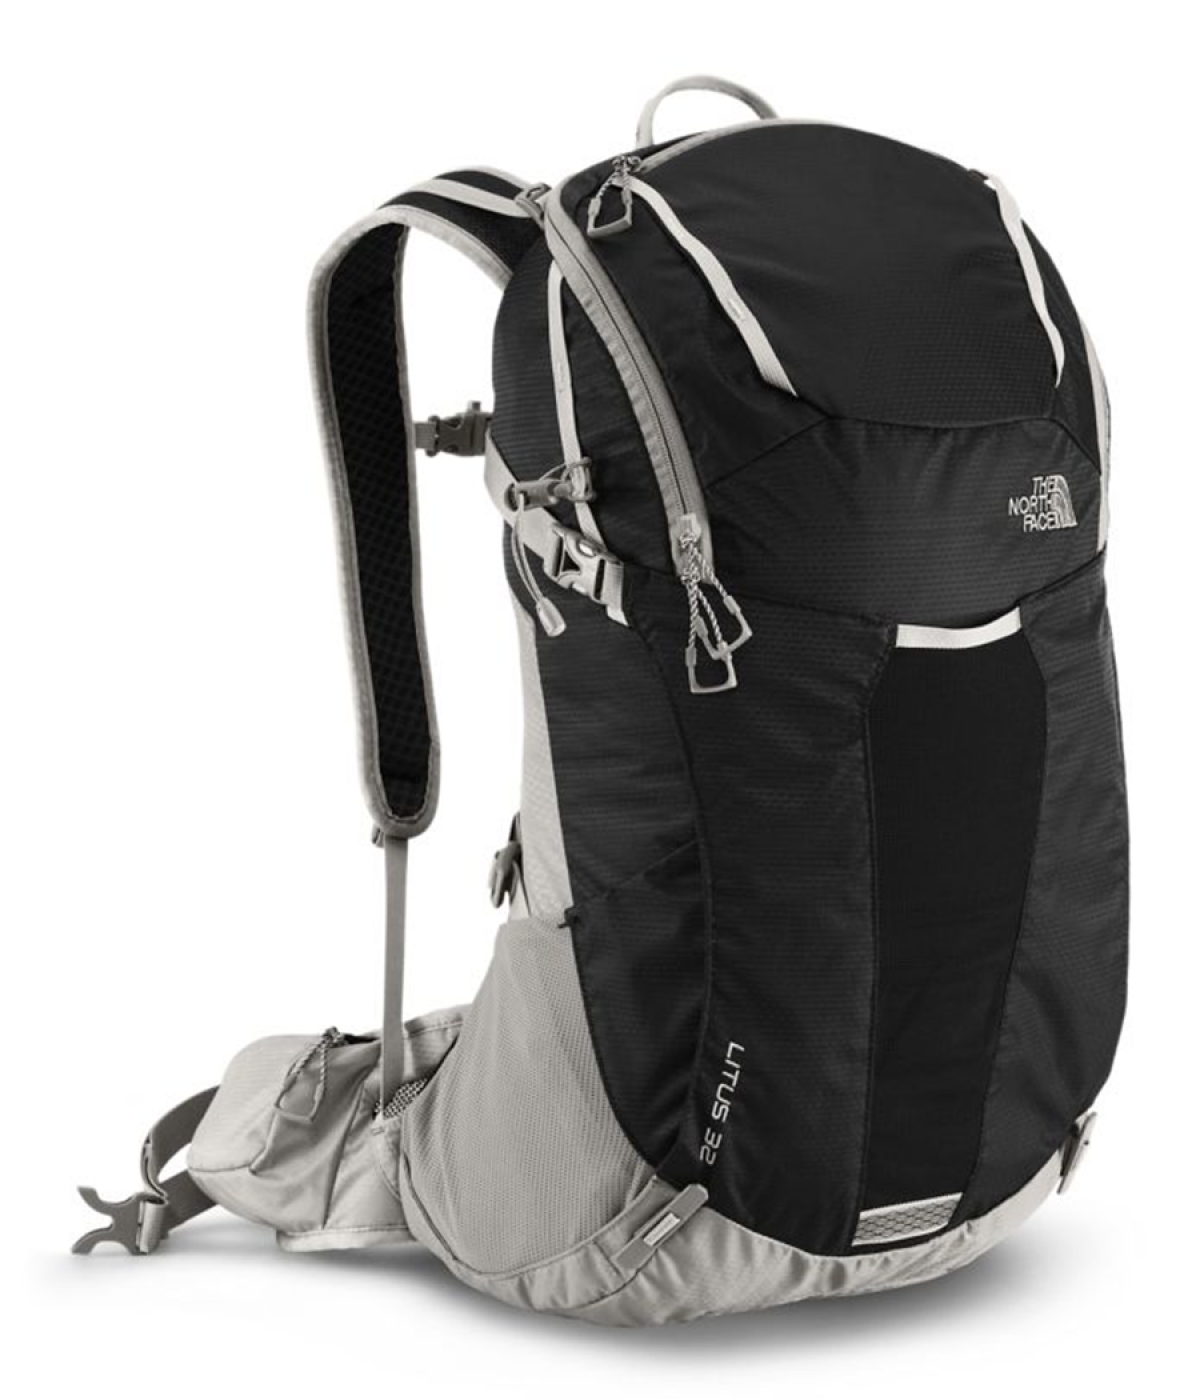 North Face Litus 32: Compact Bag For Multi-Day Trips